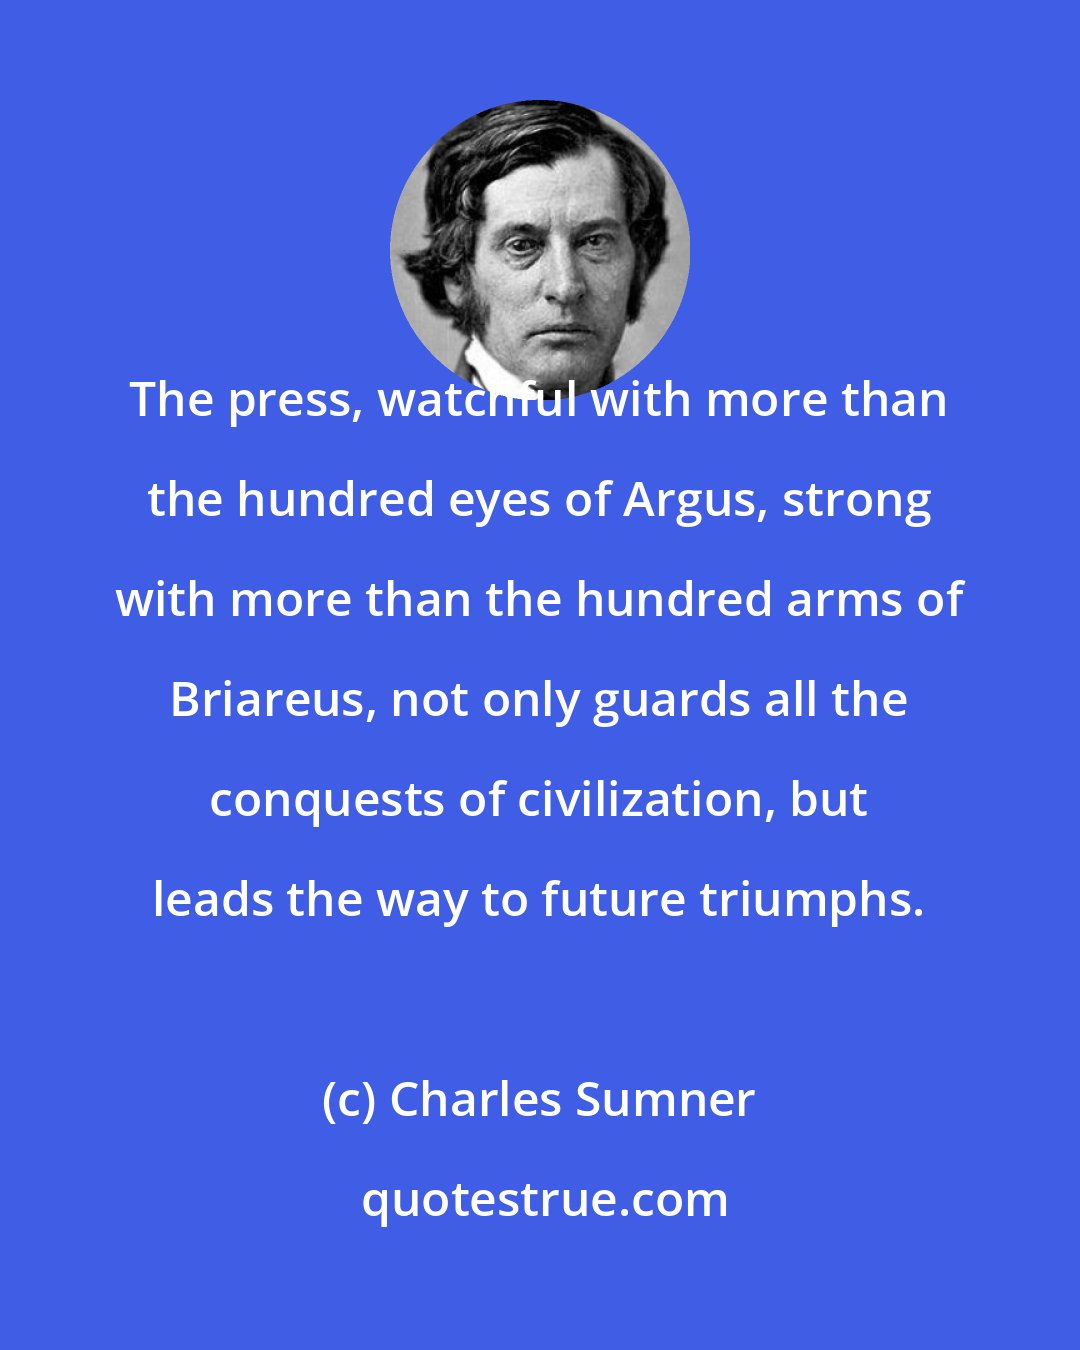 Charles Sumner: The press, watchful with more than the hundred eyes of Argus, strong with more than the hundred arms of Briareus, not only guards all the conquests of civilization, but leads the way to future triumphs.